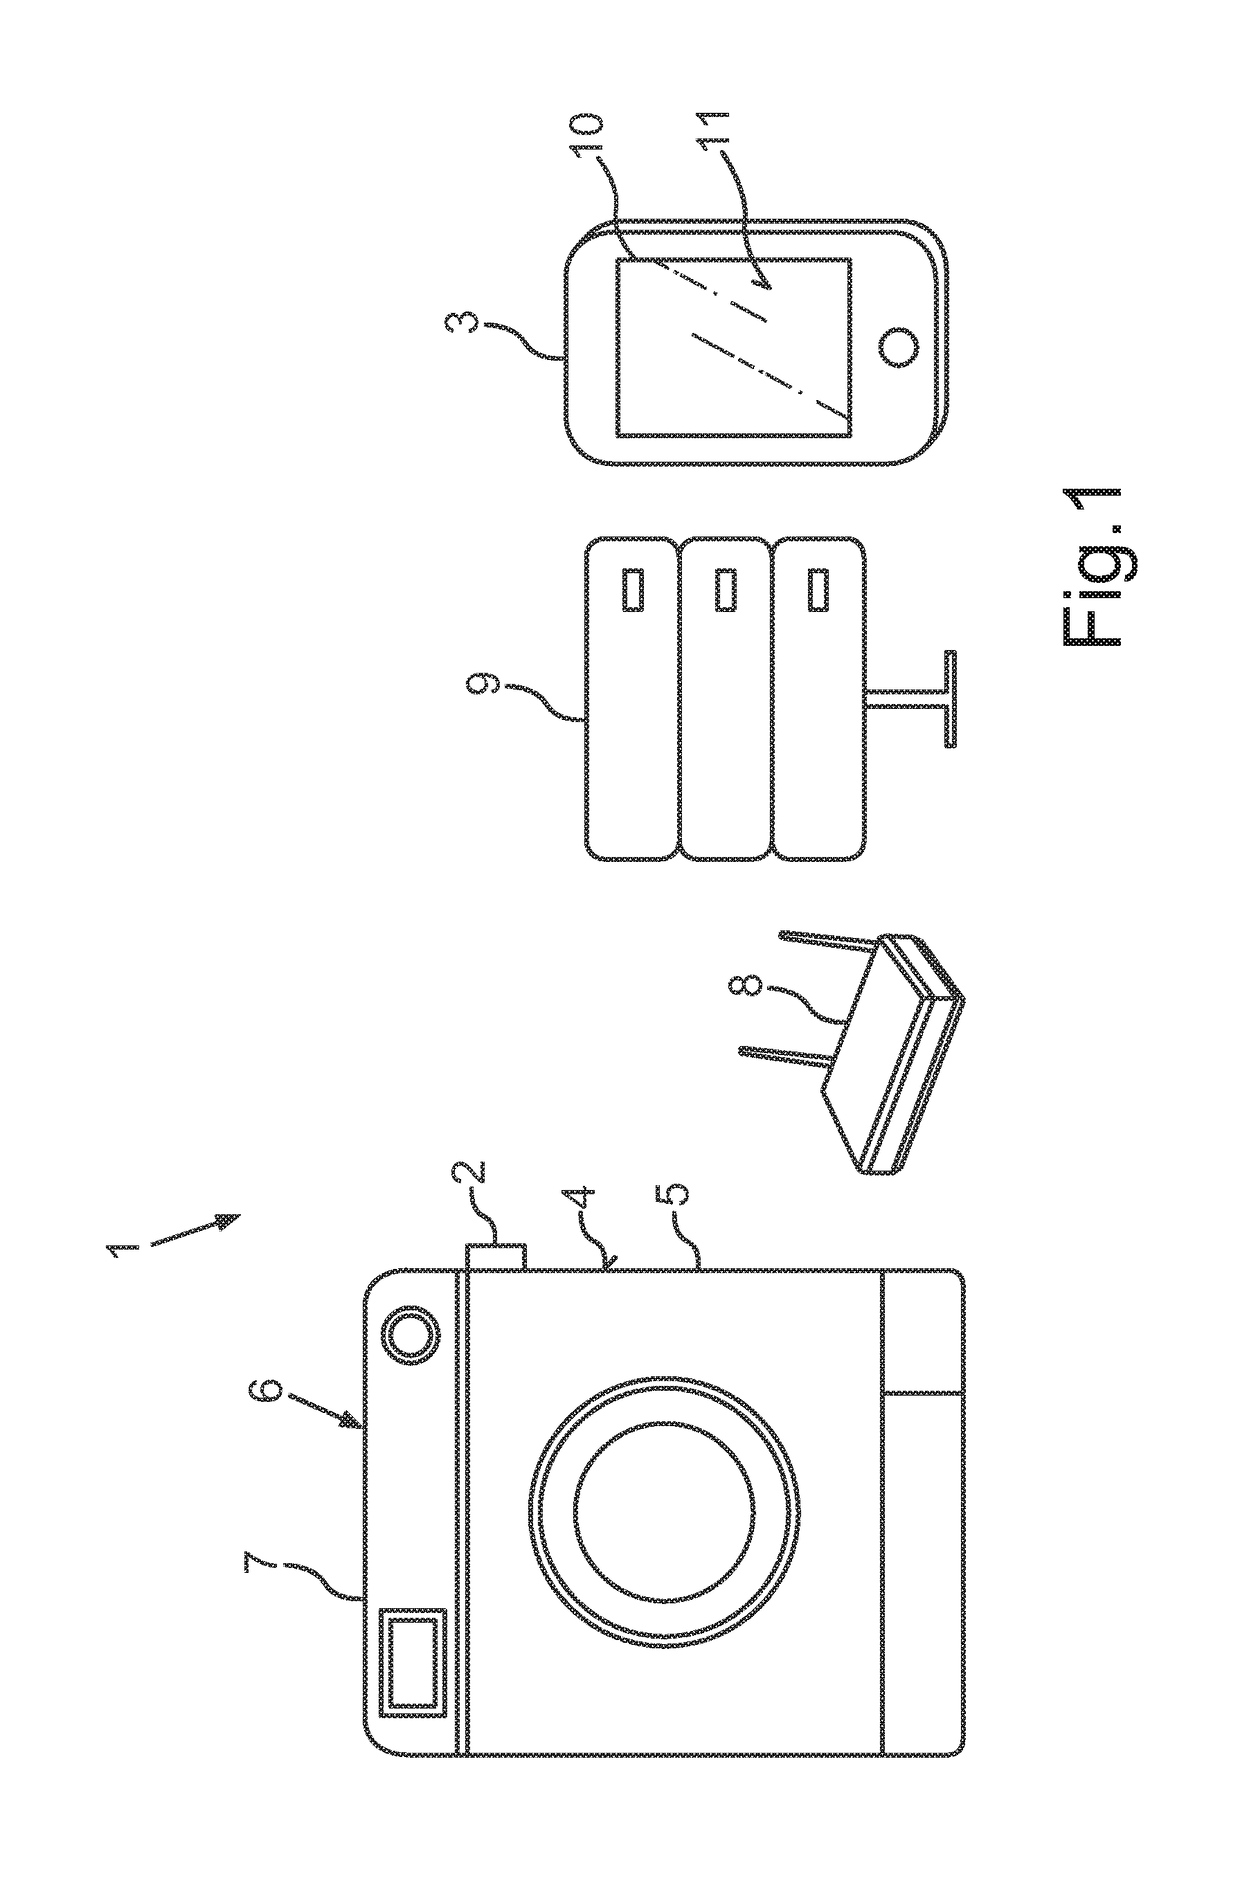 System, retrofit module and method for monitoring a current operational state of a program-controlled domestic appliance